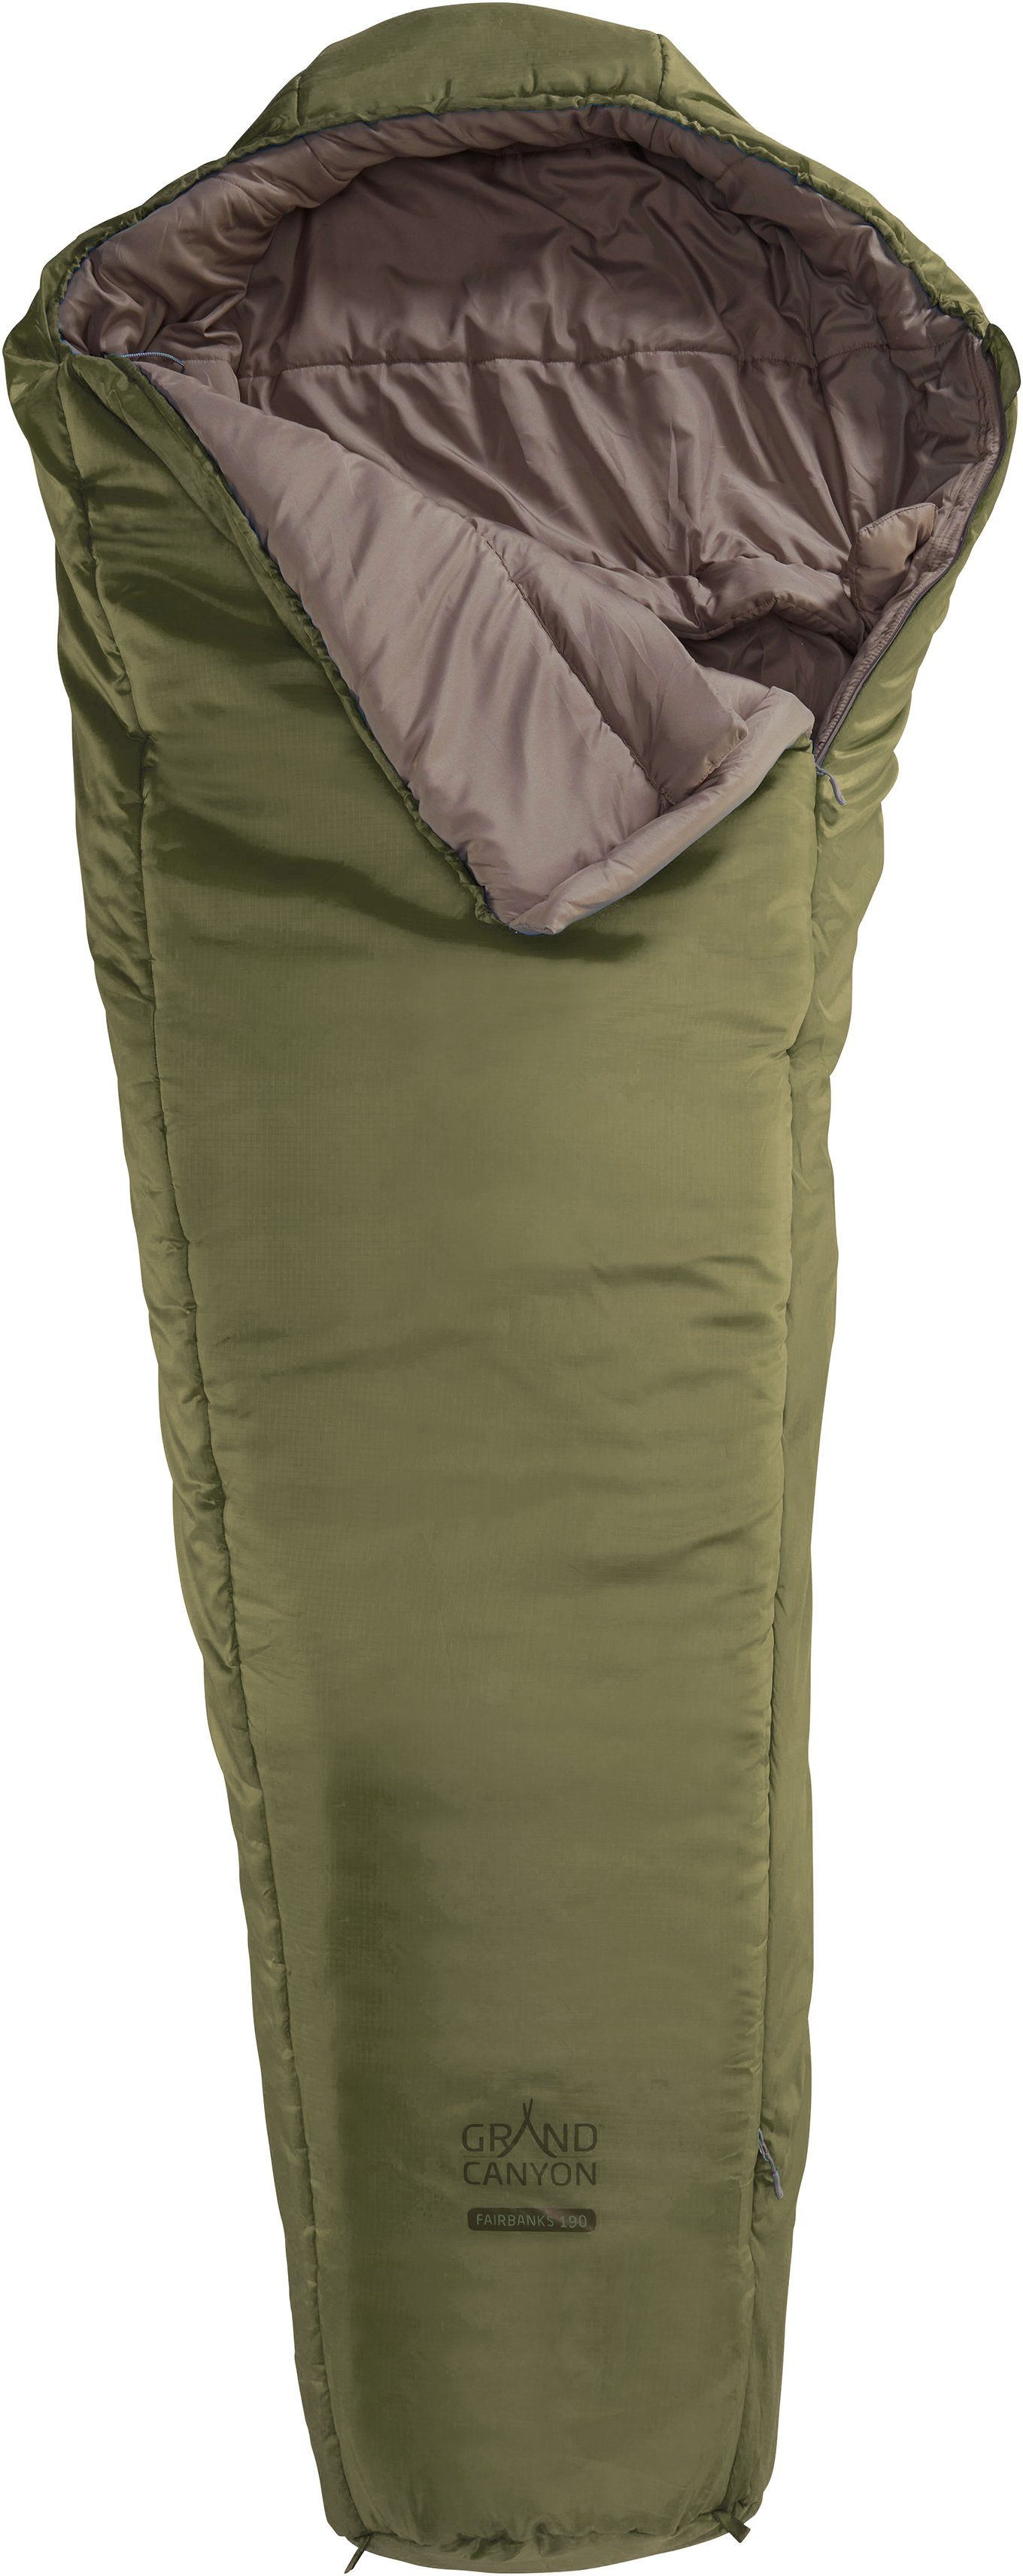 CANYON Capulet Olive tlg) GRAND (2 FAIRBANKS Mumienschlafsack